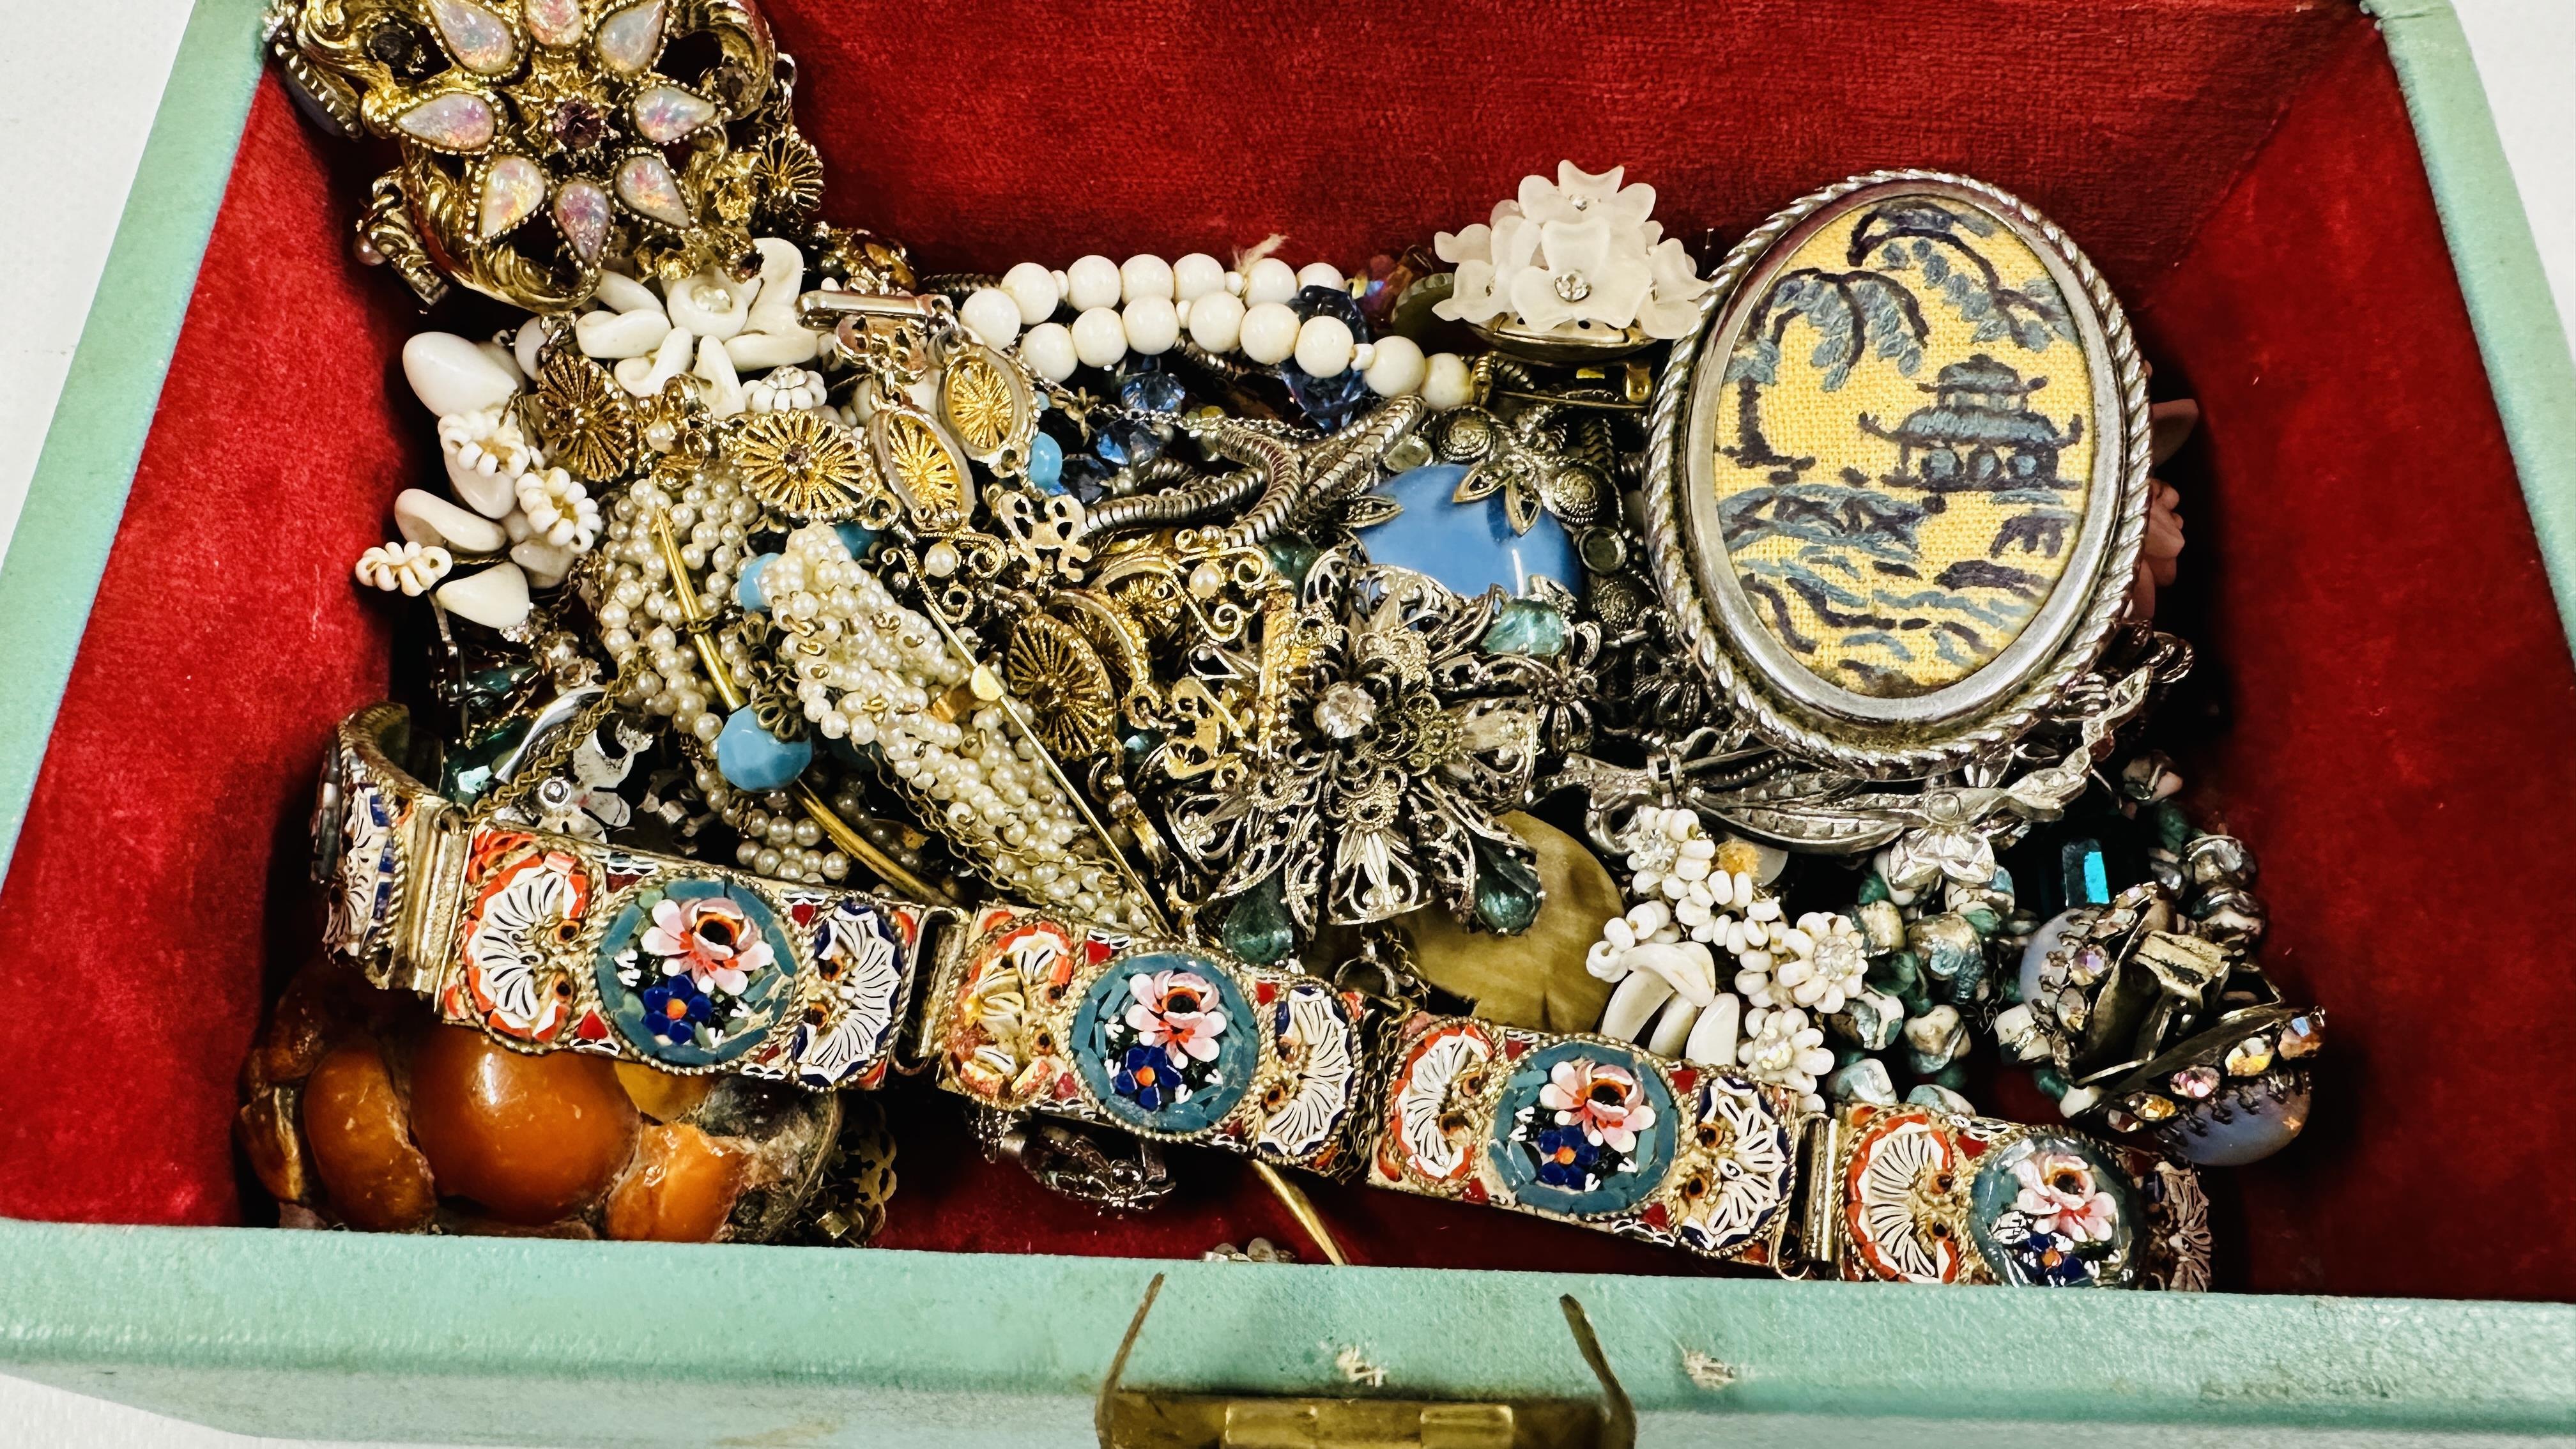 A VINTAGE JEWELLERY BOX WITH MOSAIC BRACELET, BROOCHES, NECKLACES AND A MARCASITE WATCH. - Image 2 of 8